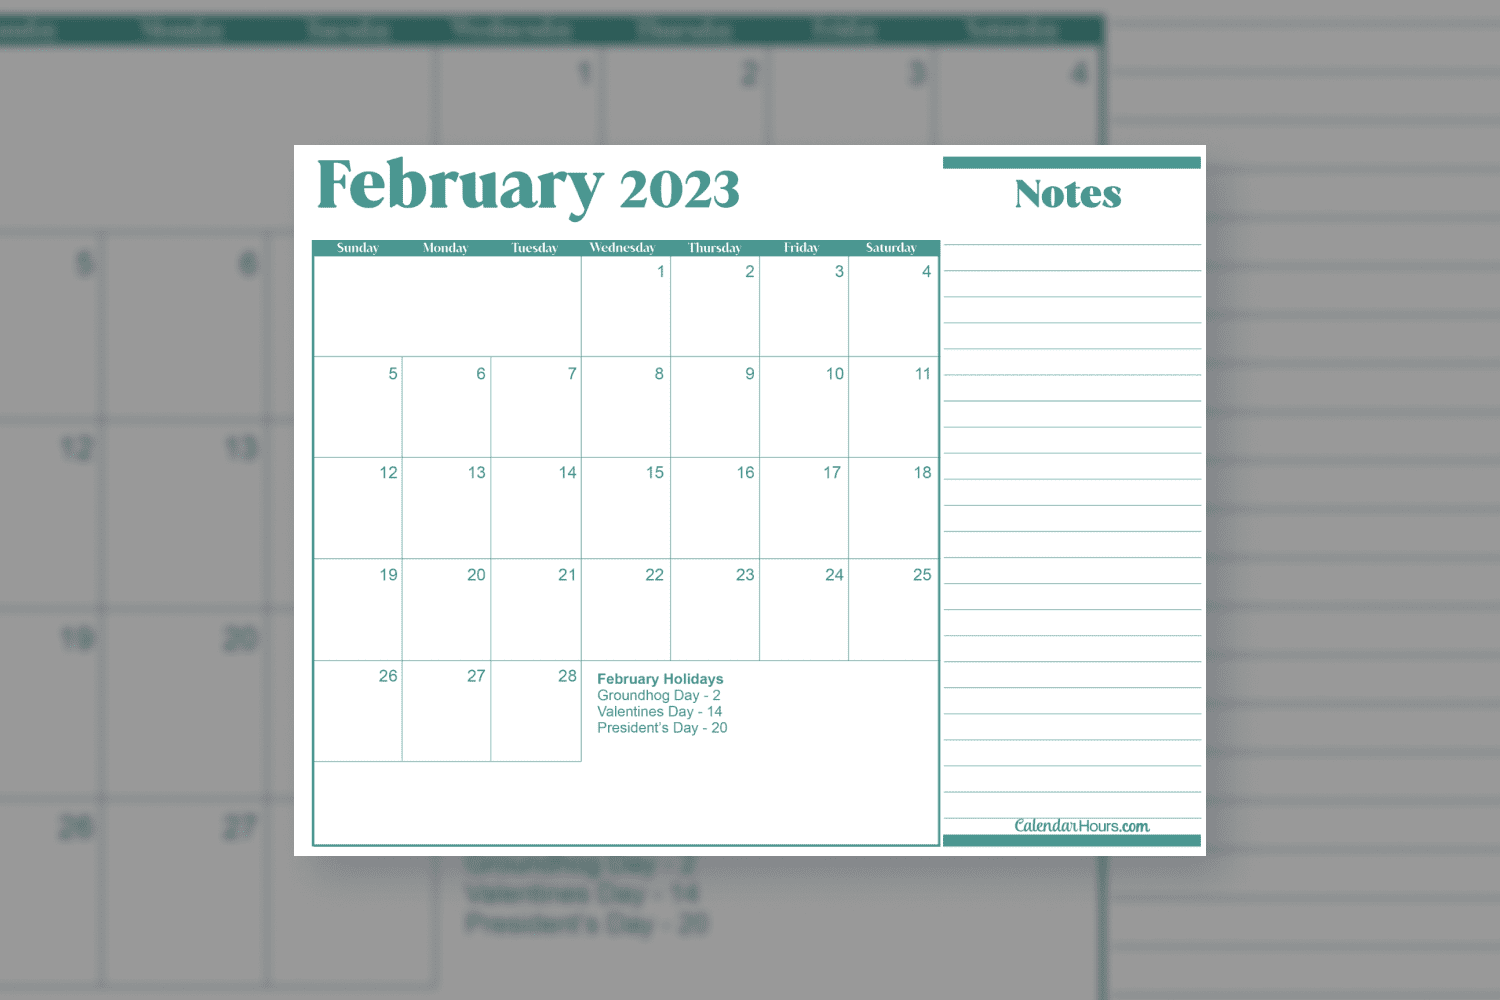 February calendar in green with a note field on the right.